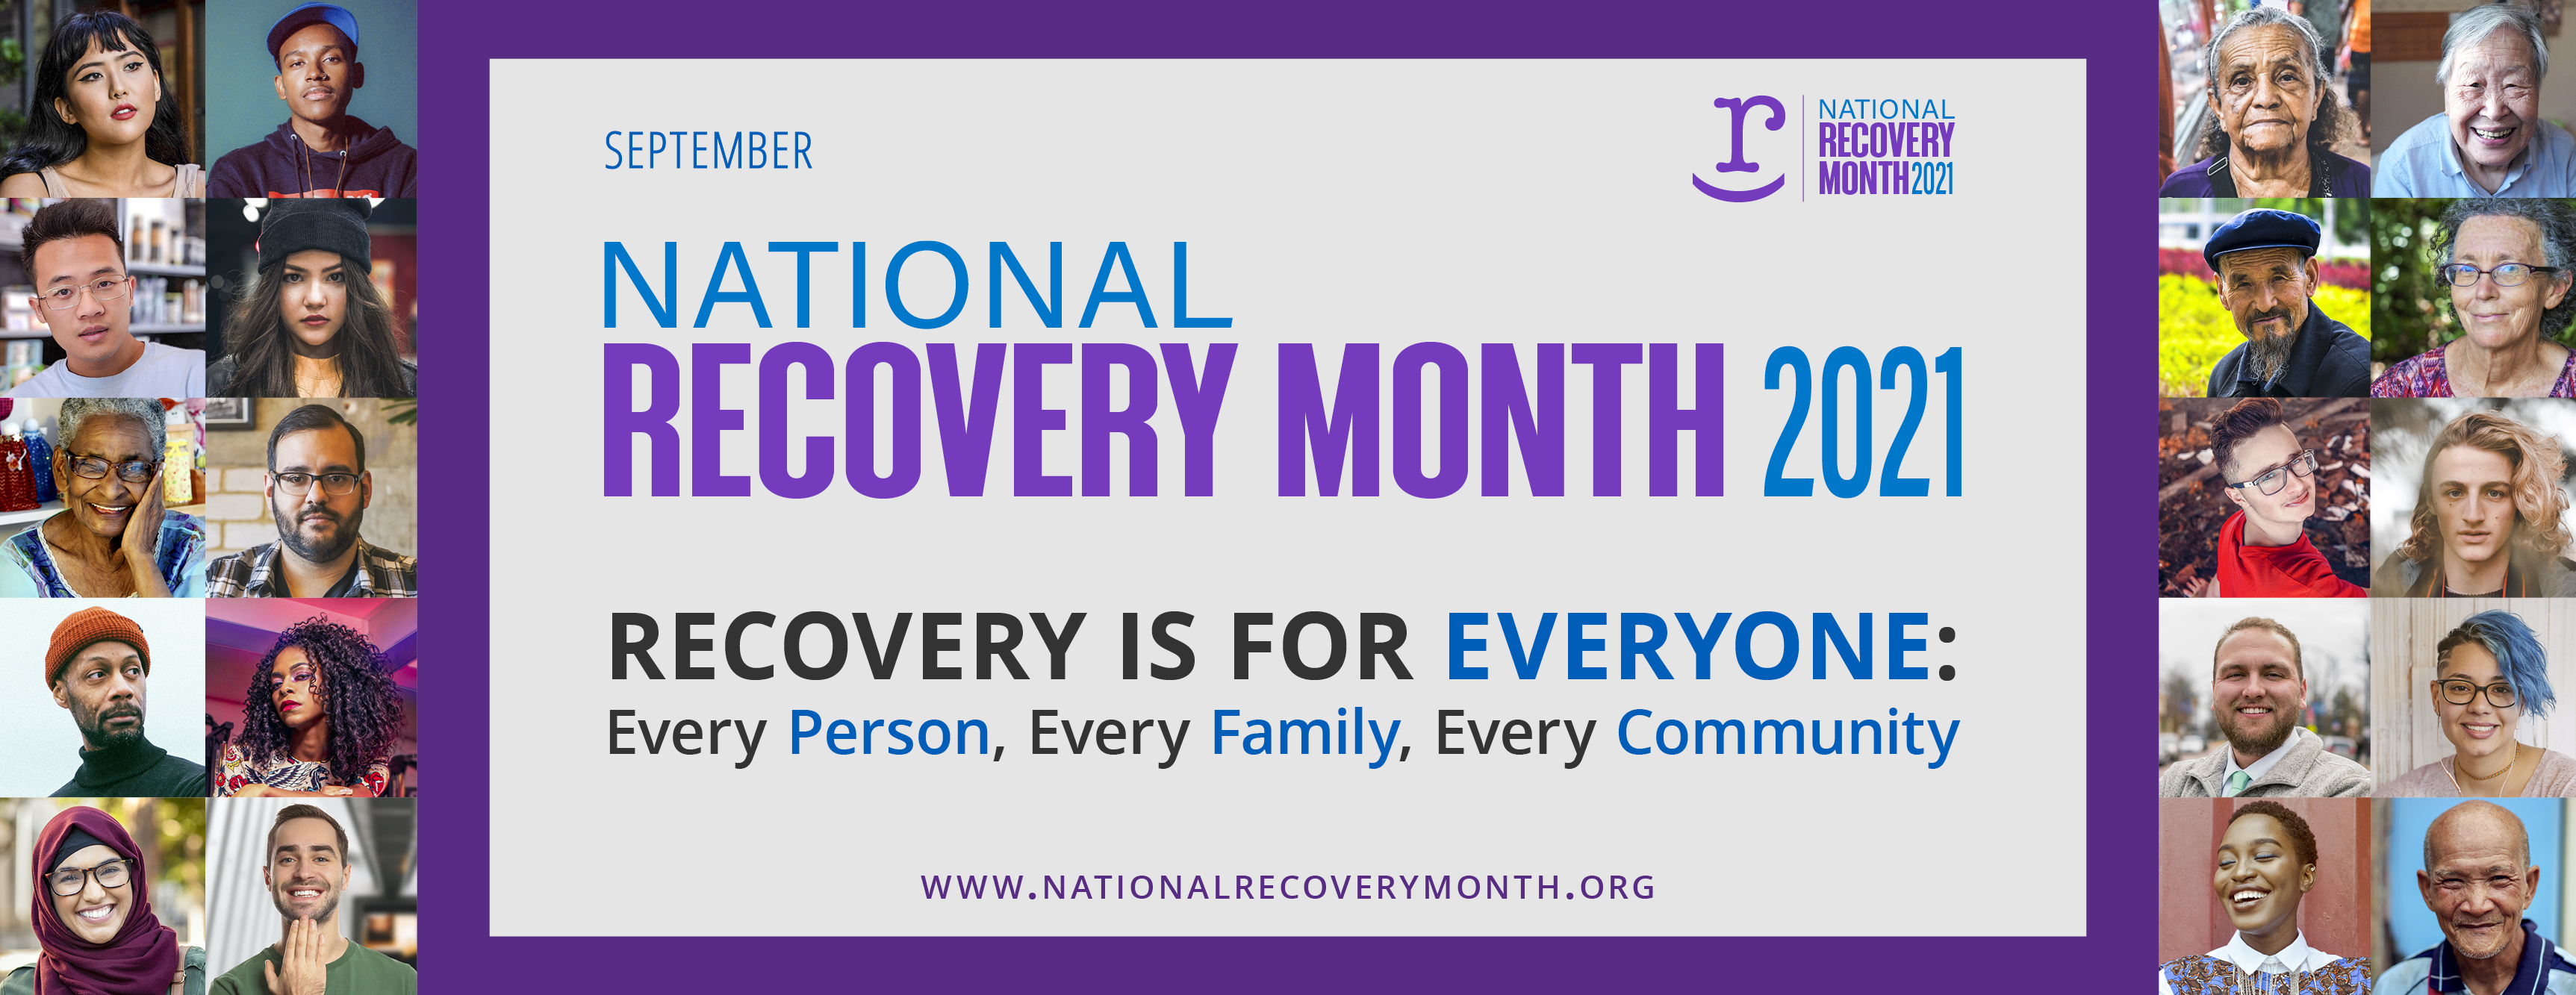 National Recovery Month 2021 Recovery is for everyone: every person, every family, every community